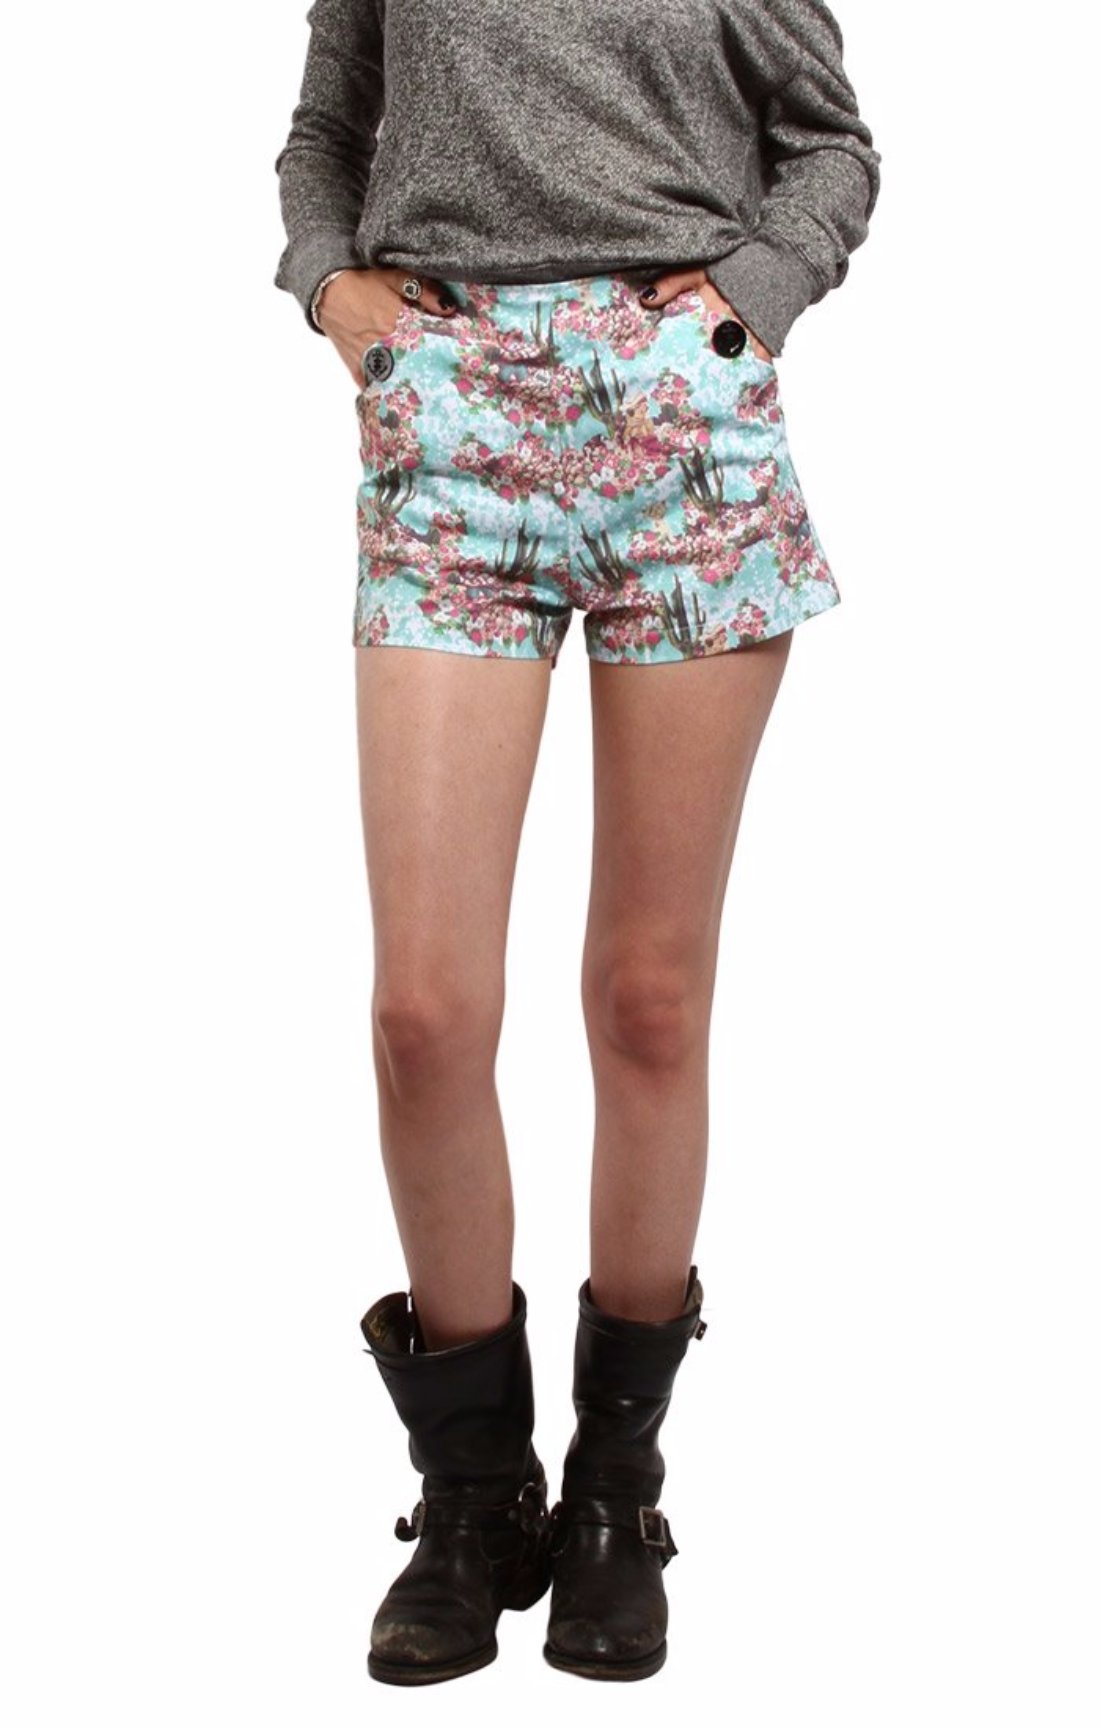 The ALONE ON THE RANGE High Waisted Shorts